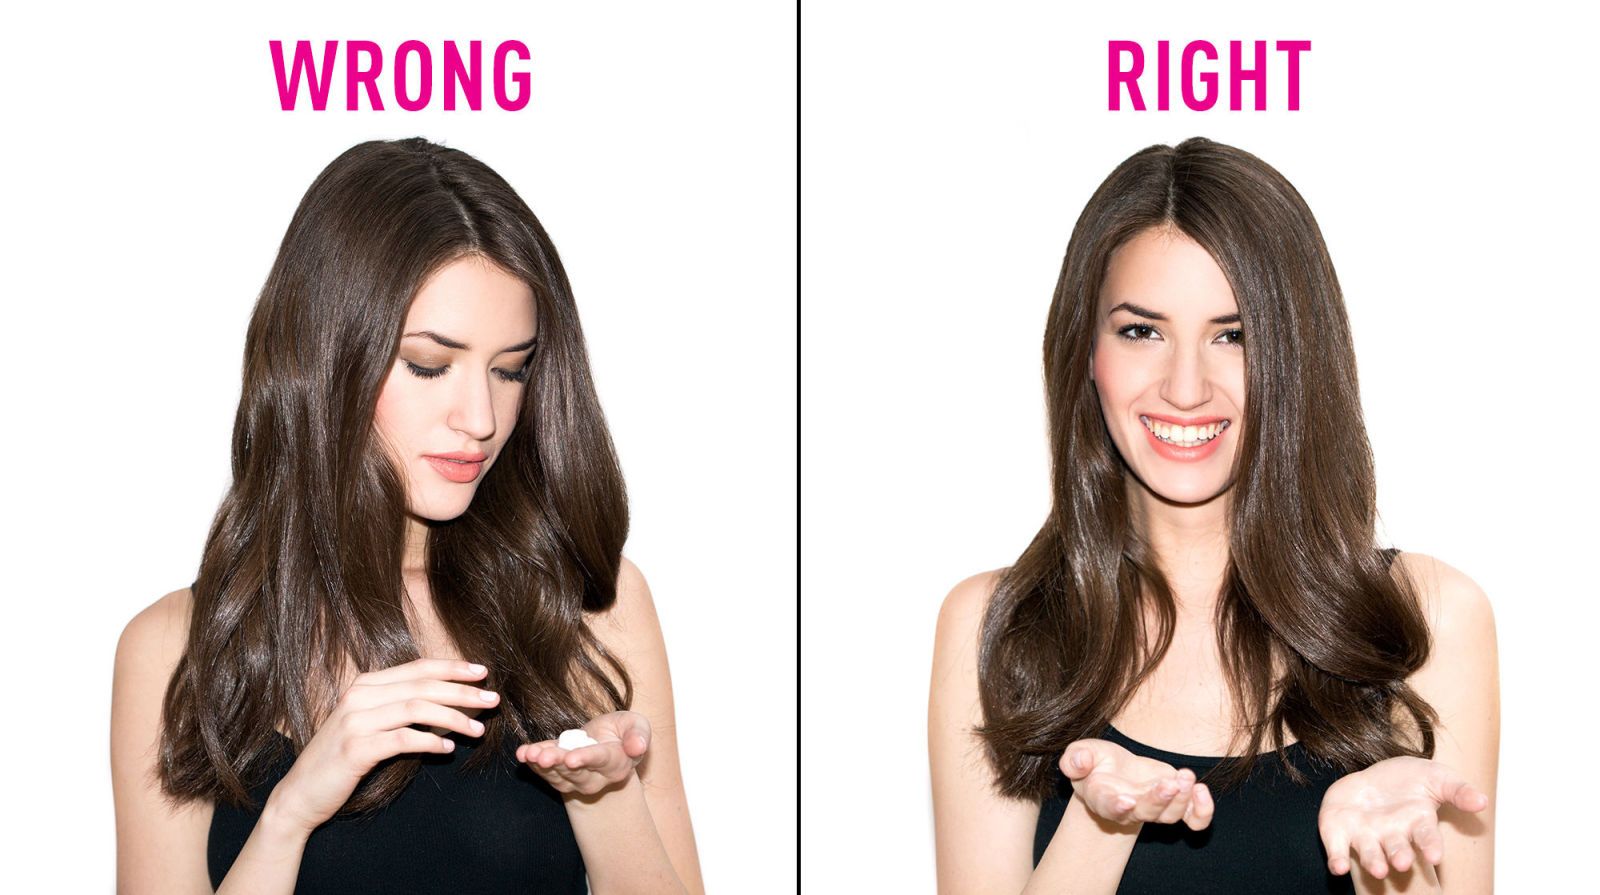 how to apply tresemme conditioner to hair